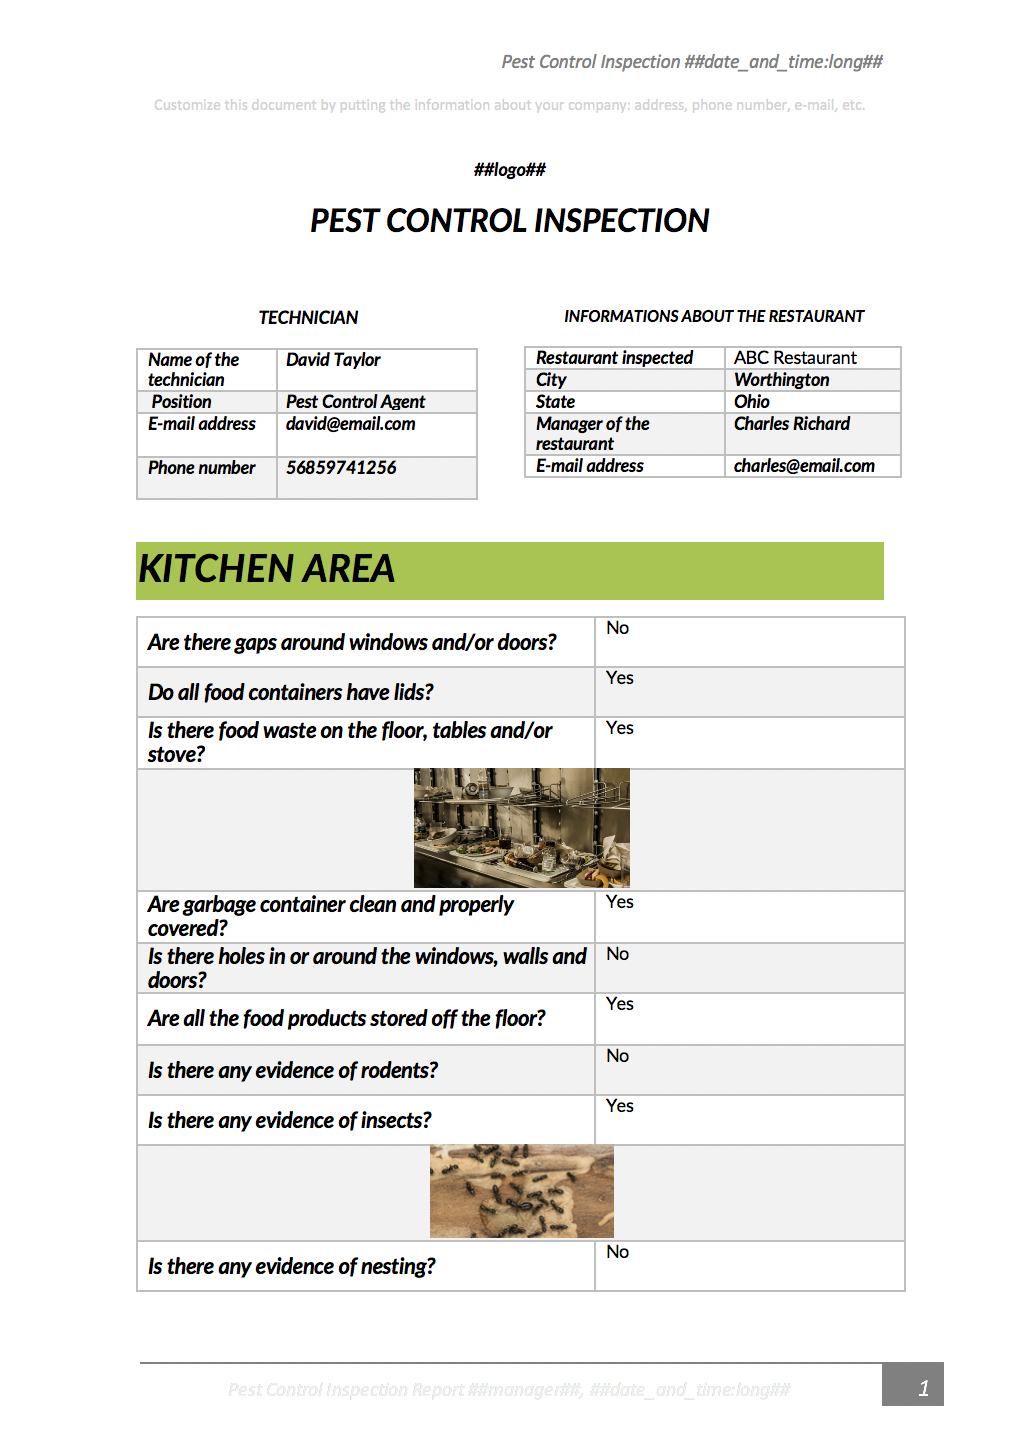 Pest Control Inspection With Kizeo Forms From Your Cellphone Regarding Pest Control Inspection Report Template